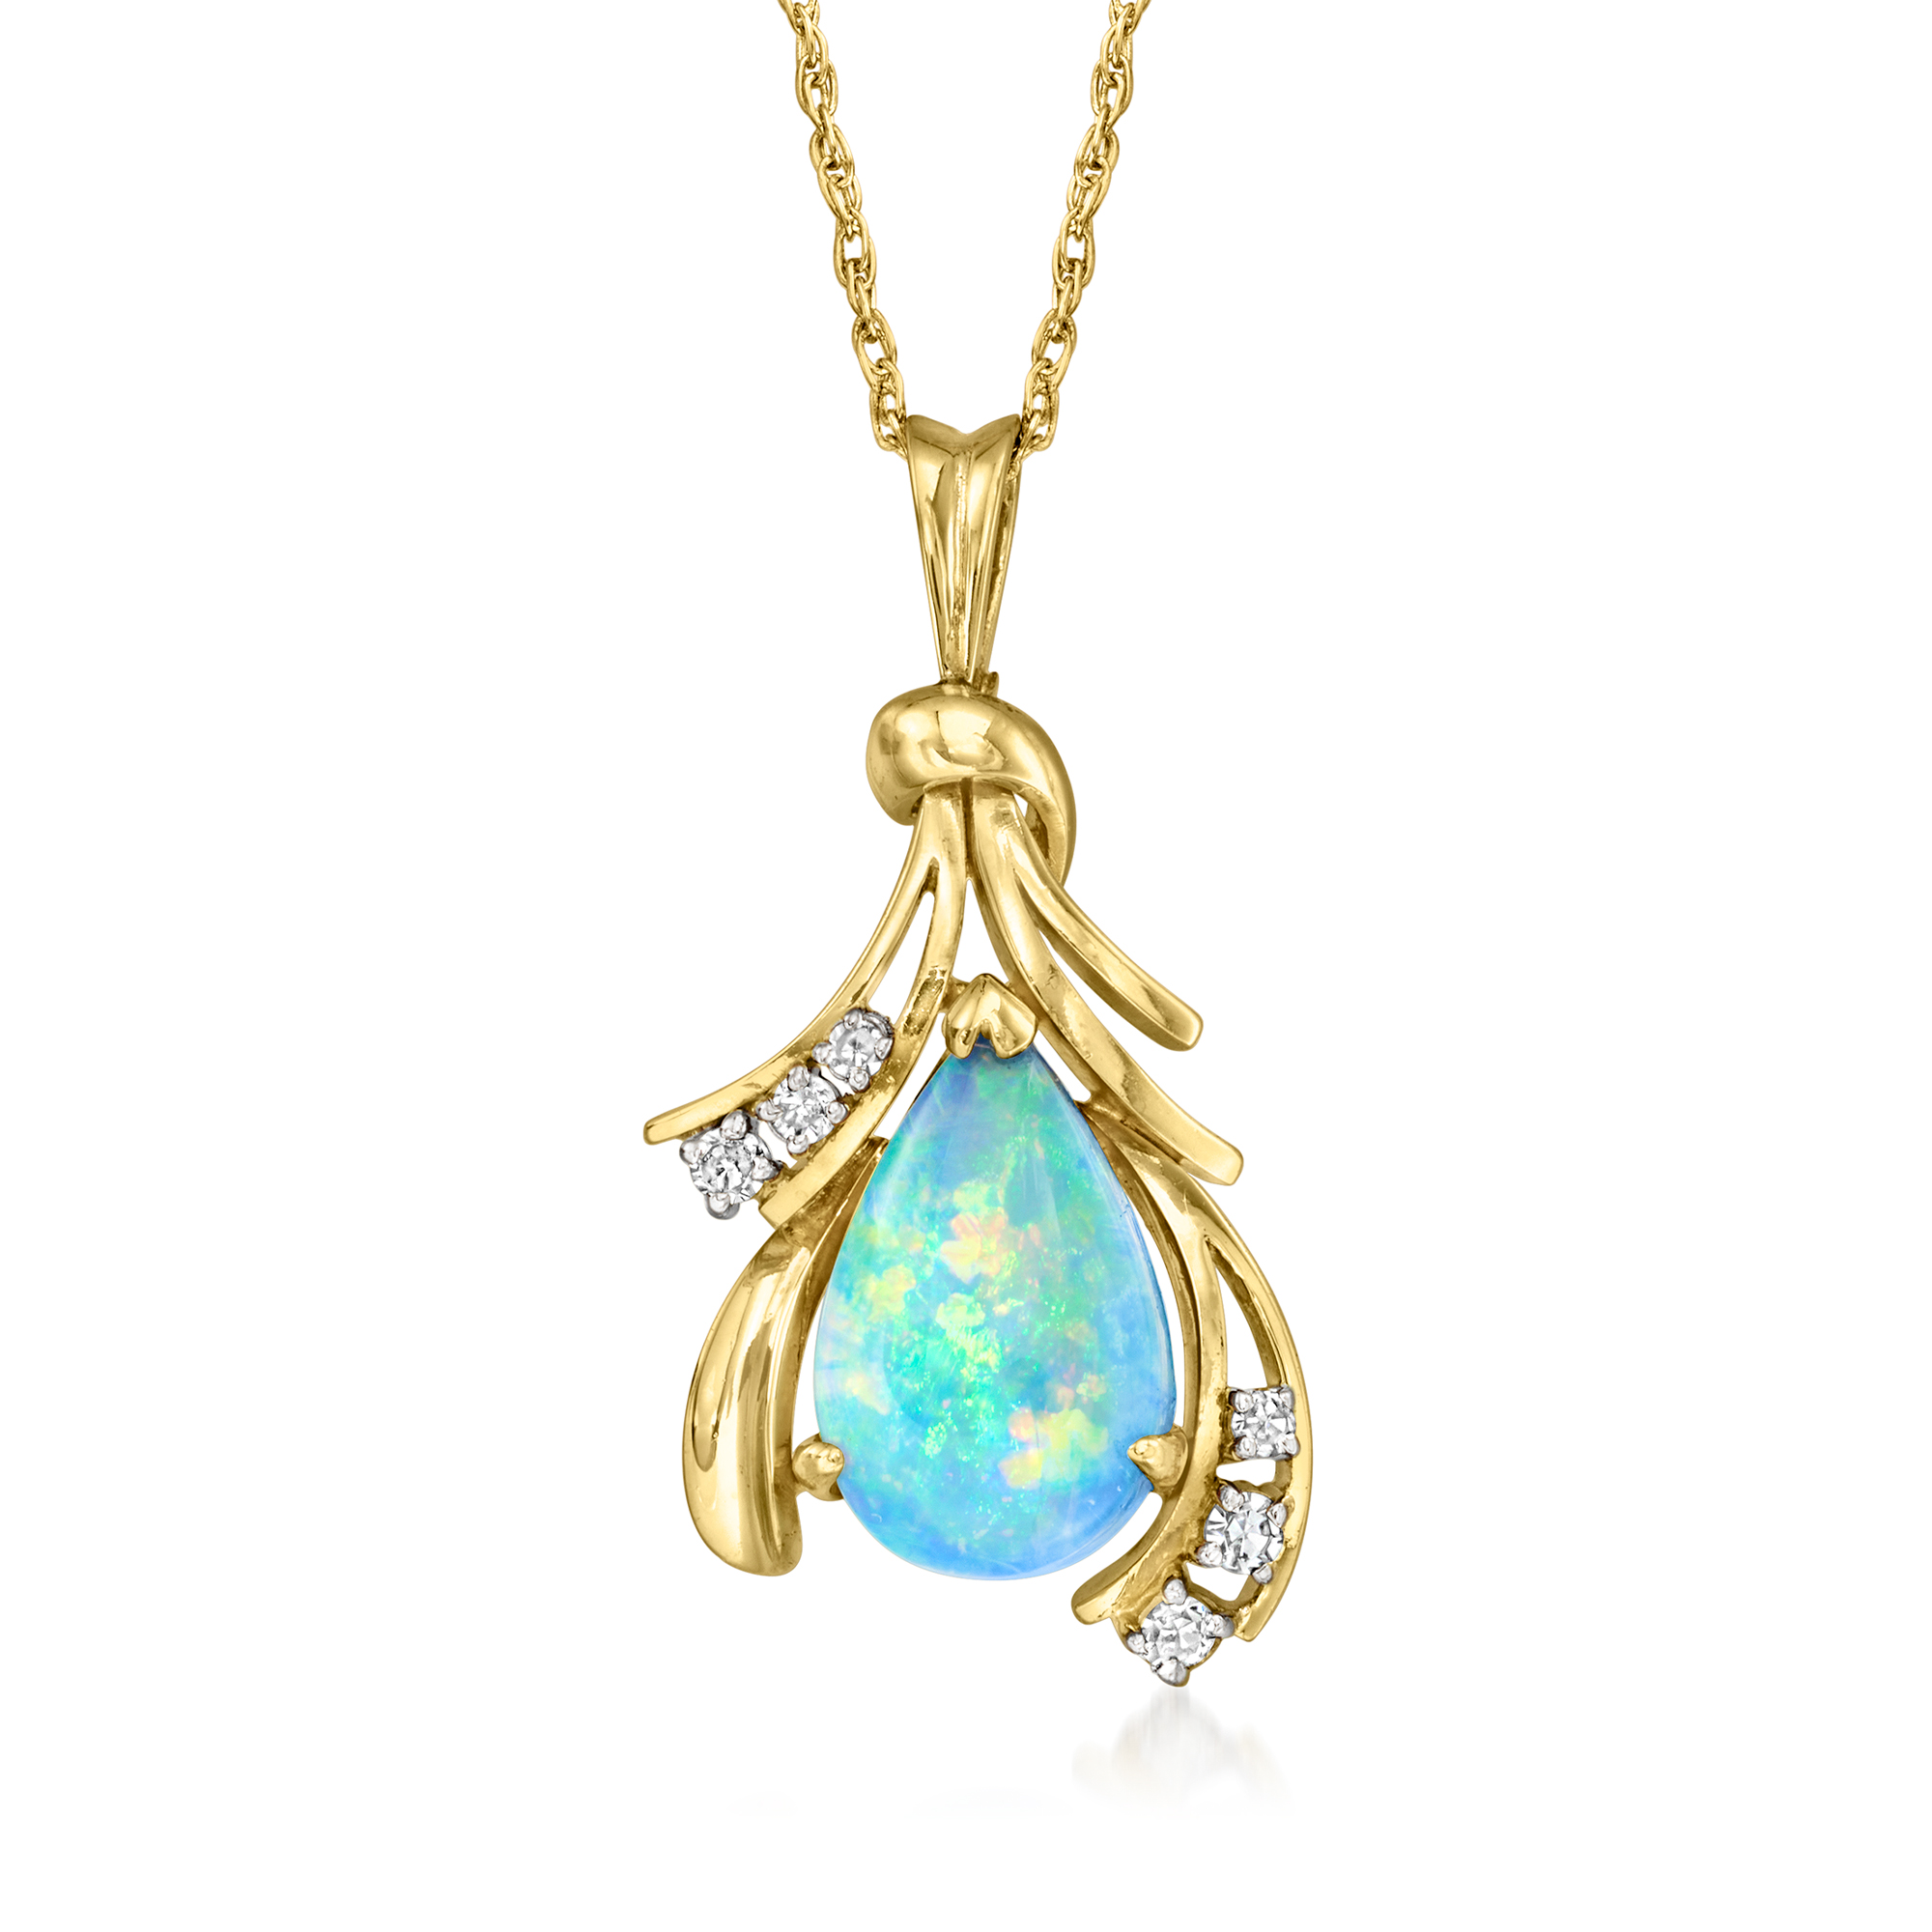 C. 1980 Vintage Opal and .15 ct. t.w. Diamond Pendant Necklace in